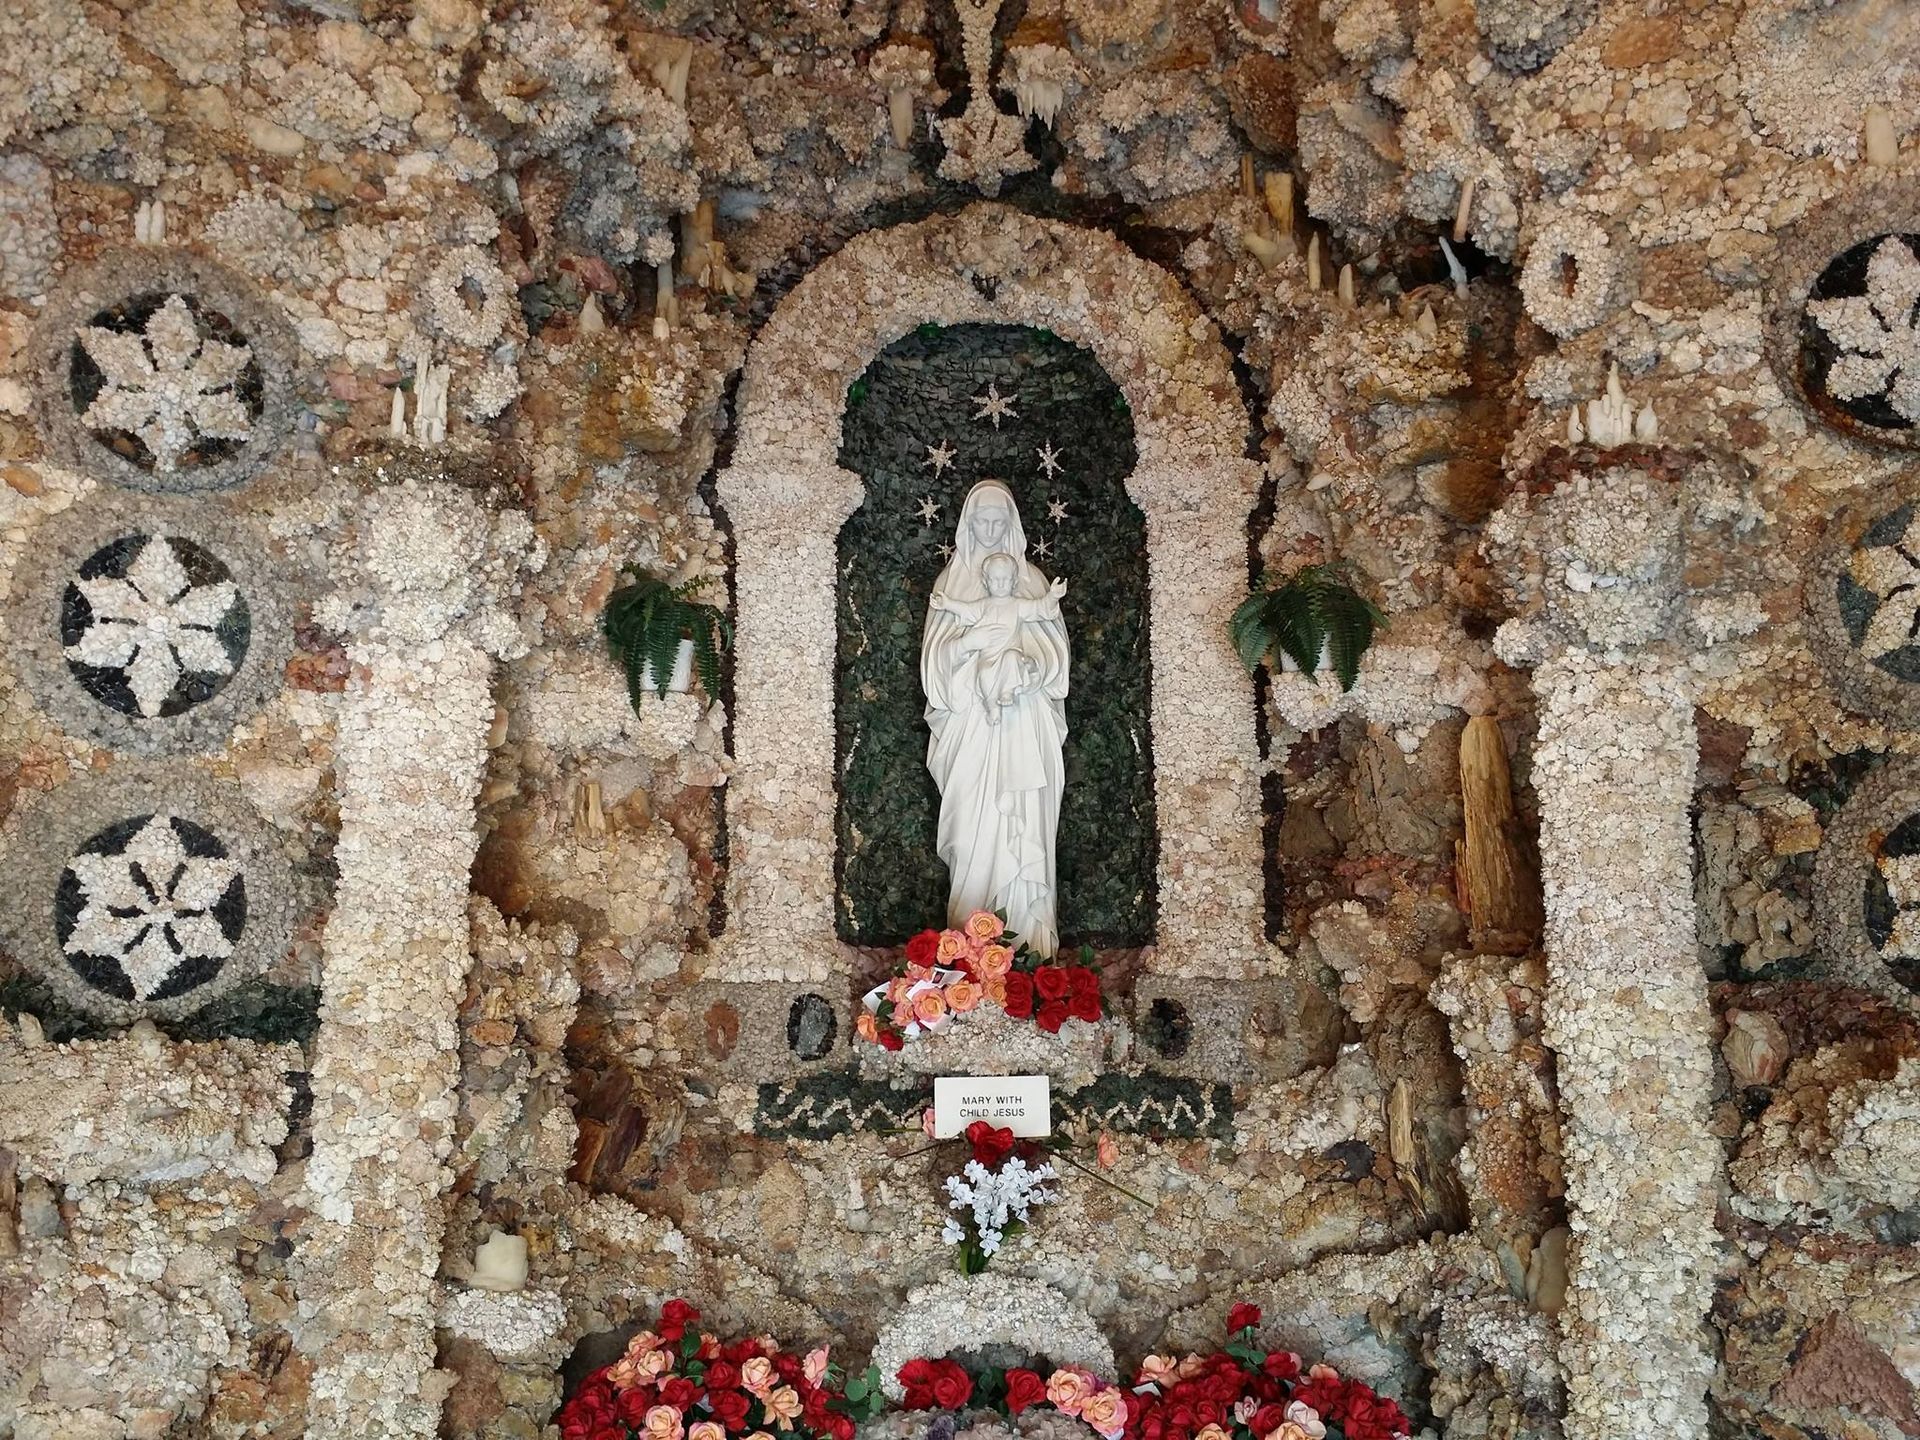 World’s Largest Man-made Grotto: world record in West Bend, Iowa